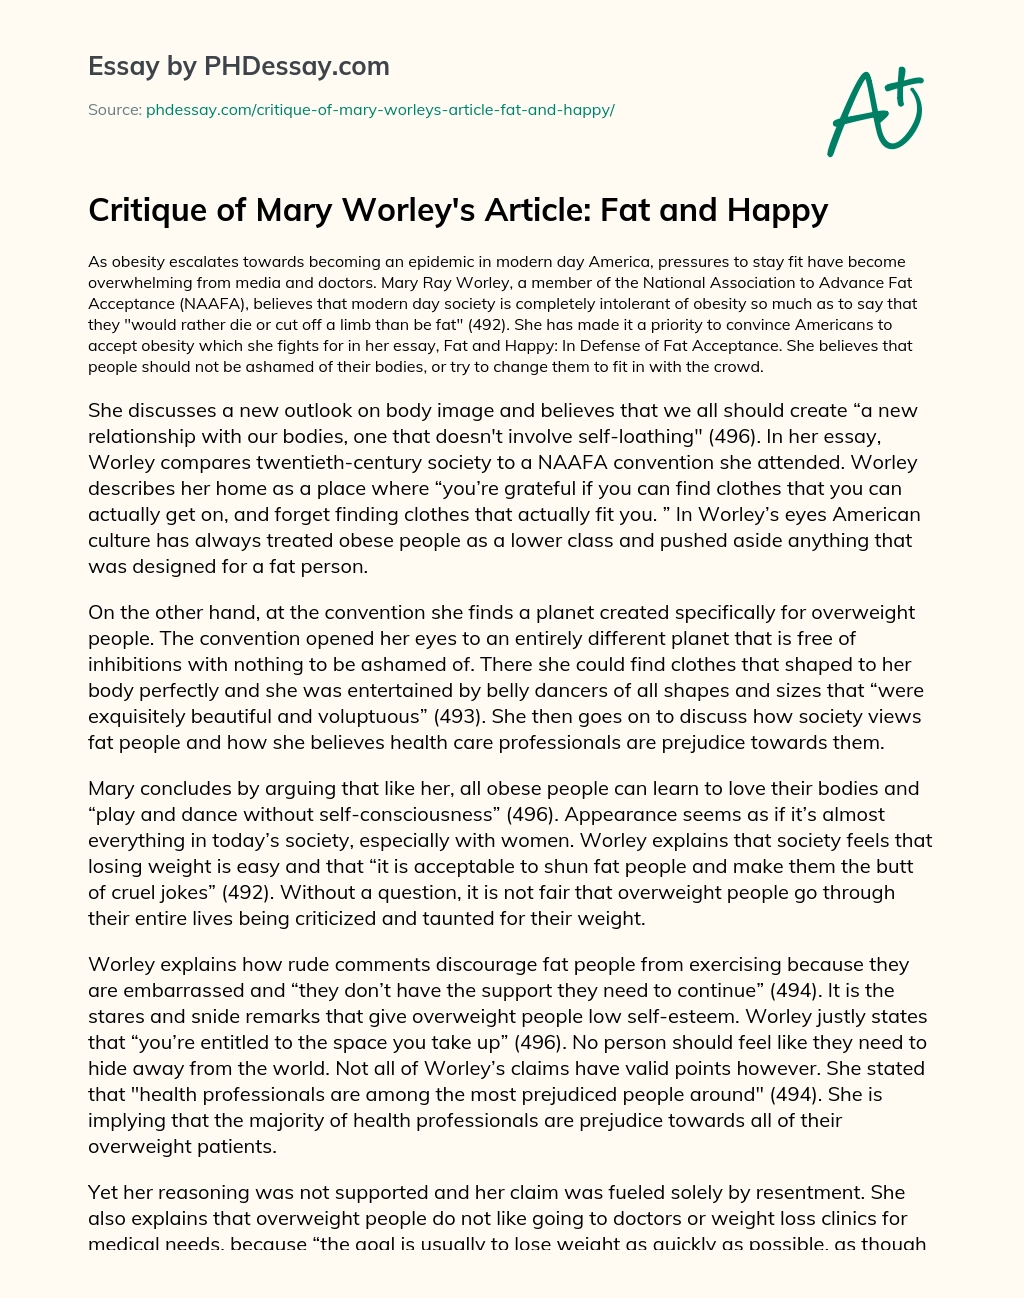 Critique of Mary Worley’s Article: Fat and Happy essay